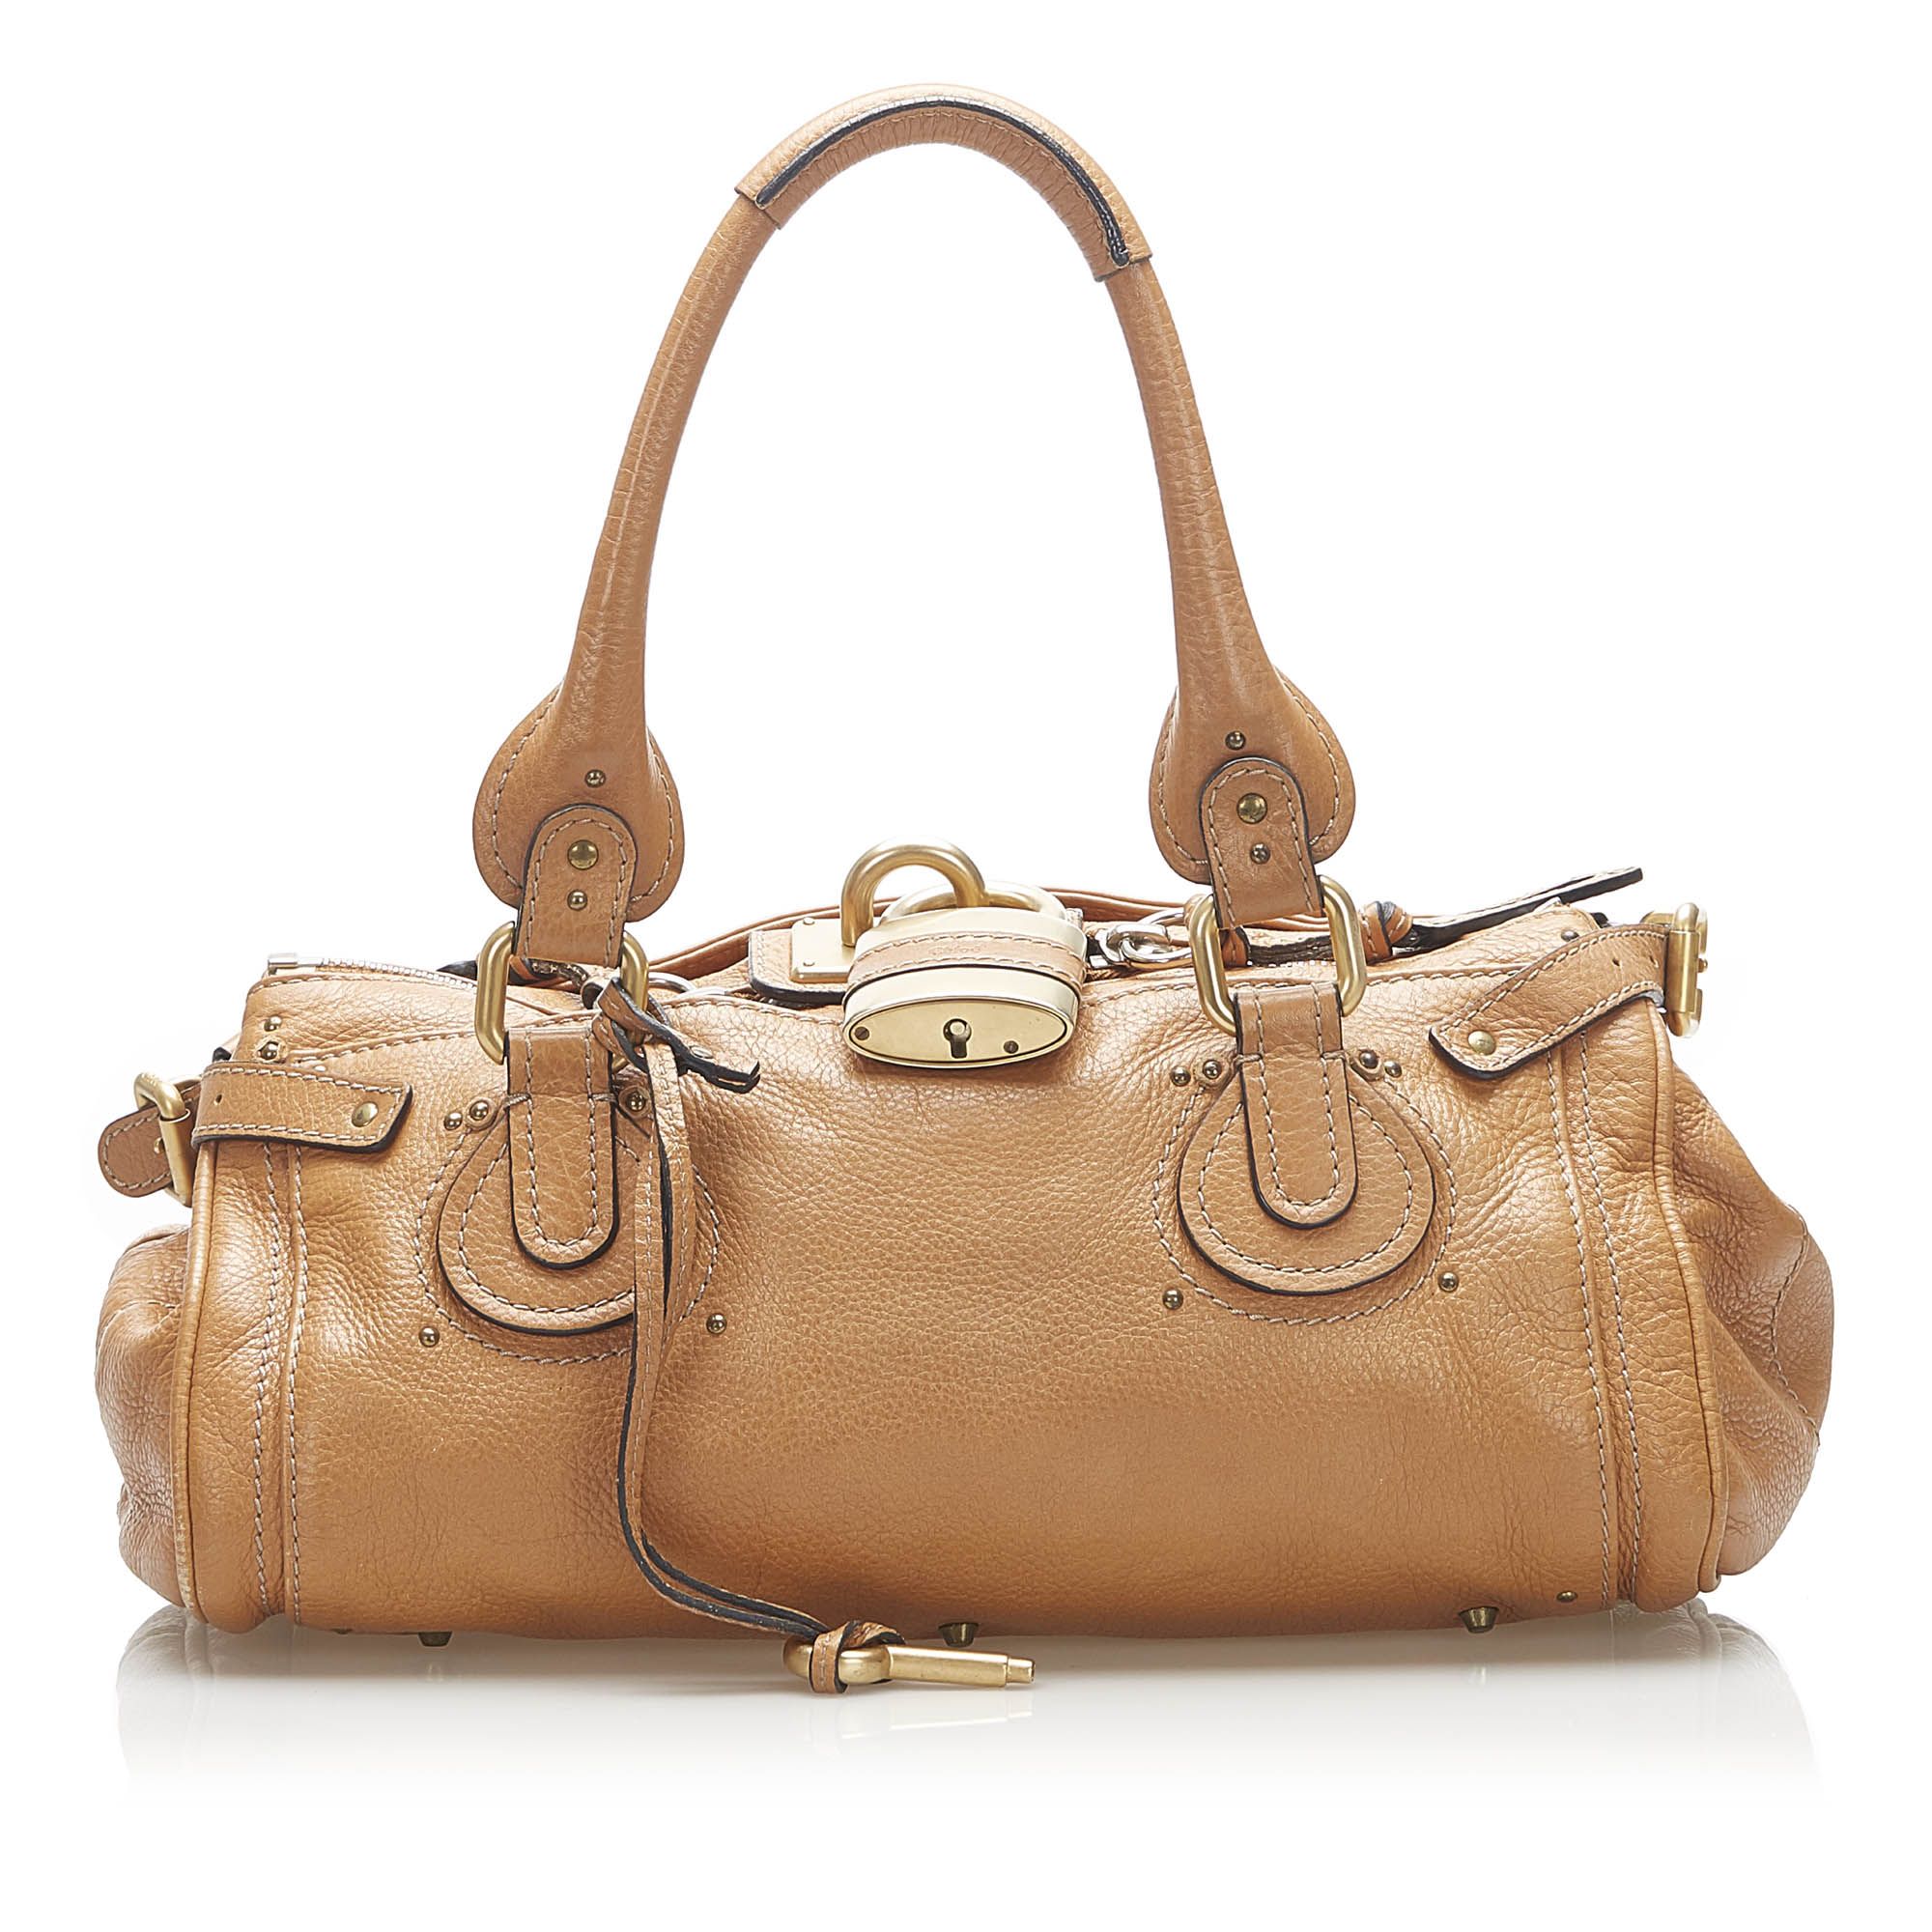 VINTAGE. RRP AS NEW. The Paddington handbag features a leather body, a rolled leather handles, a gold-tone padlock detail, a top zip closure, and an interior zip pocket.Exterior back is discolored. Exterior bottom is discolored. Exterior corners is discolored. Exterior front is discolored. Exterior handle is discolored. Exterior side is discolored. Buckle is tarnished. Studs is tarnished.

Dimensions:
Length 16cm
Width 35cm
Depth 18cm
Hand Drop 18cm
Shoulder Drop 18cm

Original Accessories: Key

Color: Brown
Material: Leather x Calf
Country of Origin: France
Boutique Reference: SSU94358K1342


Product Rating: GoodCondition